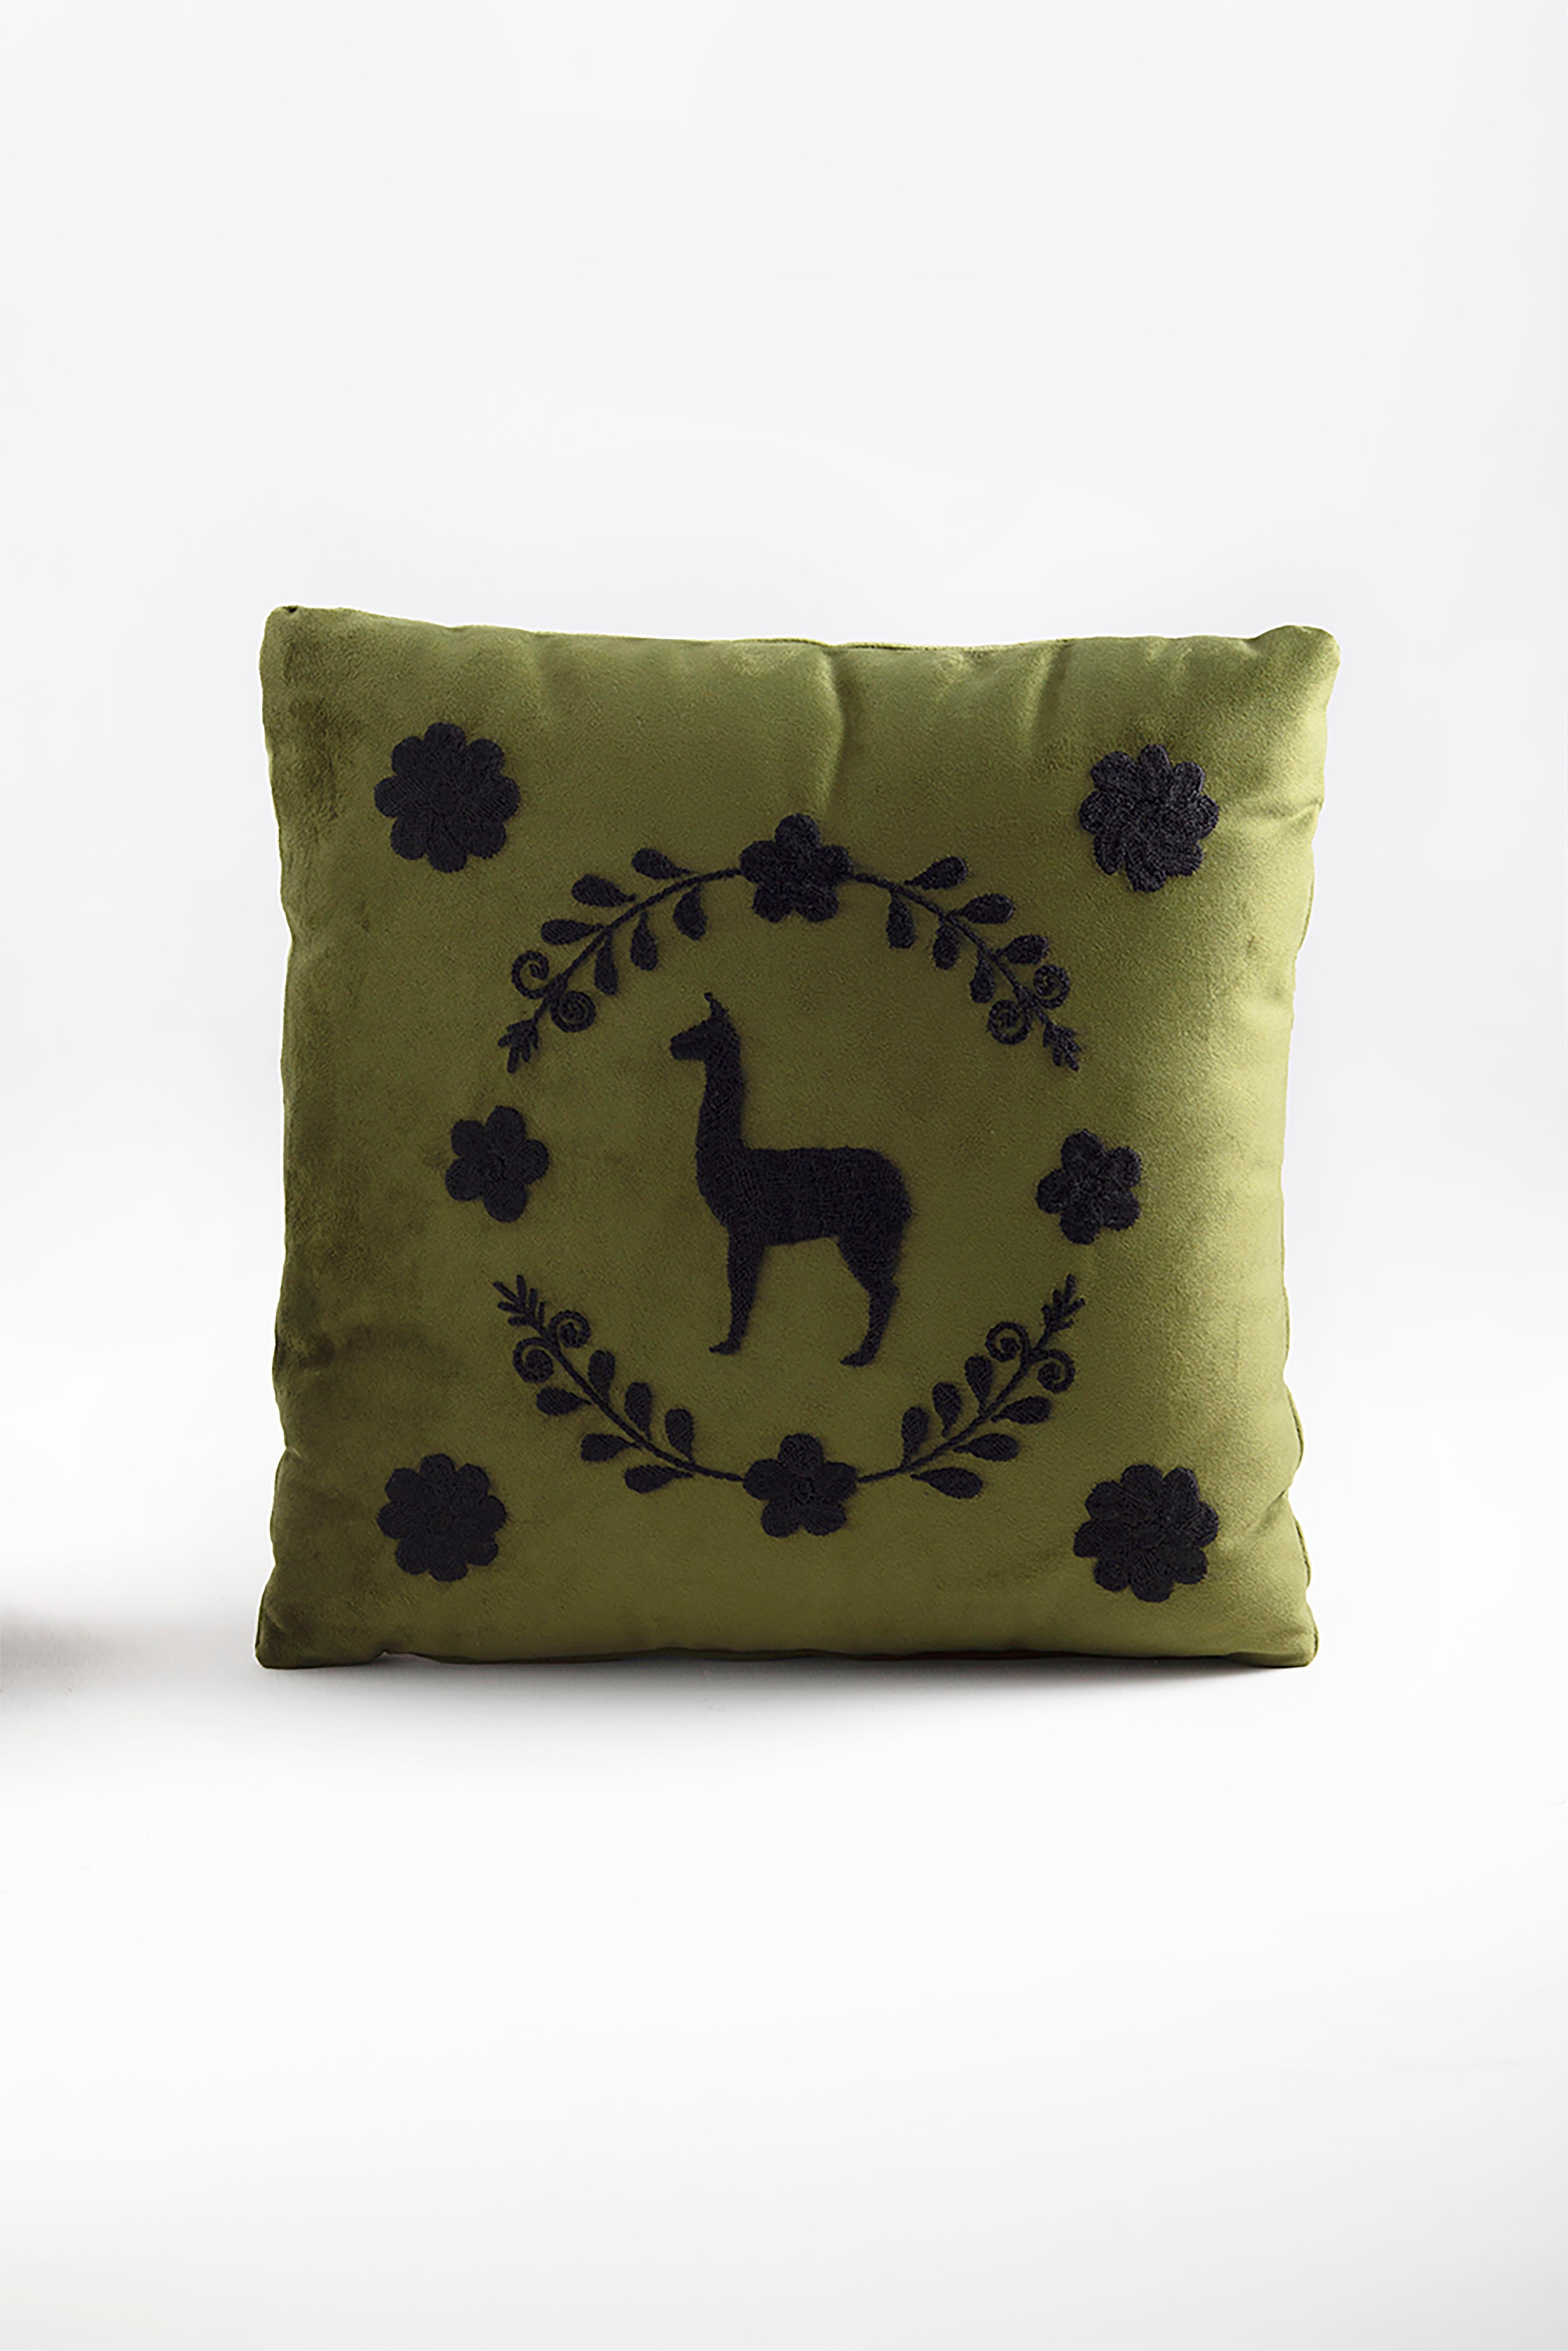 Modern LLAMA Hand Embroidered Decorative Pillows in Olive Velvet by ANDEAN, Set of 2 For Sale